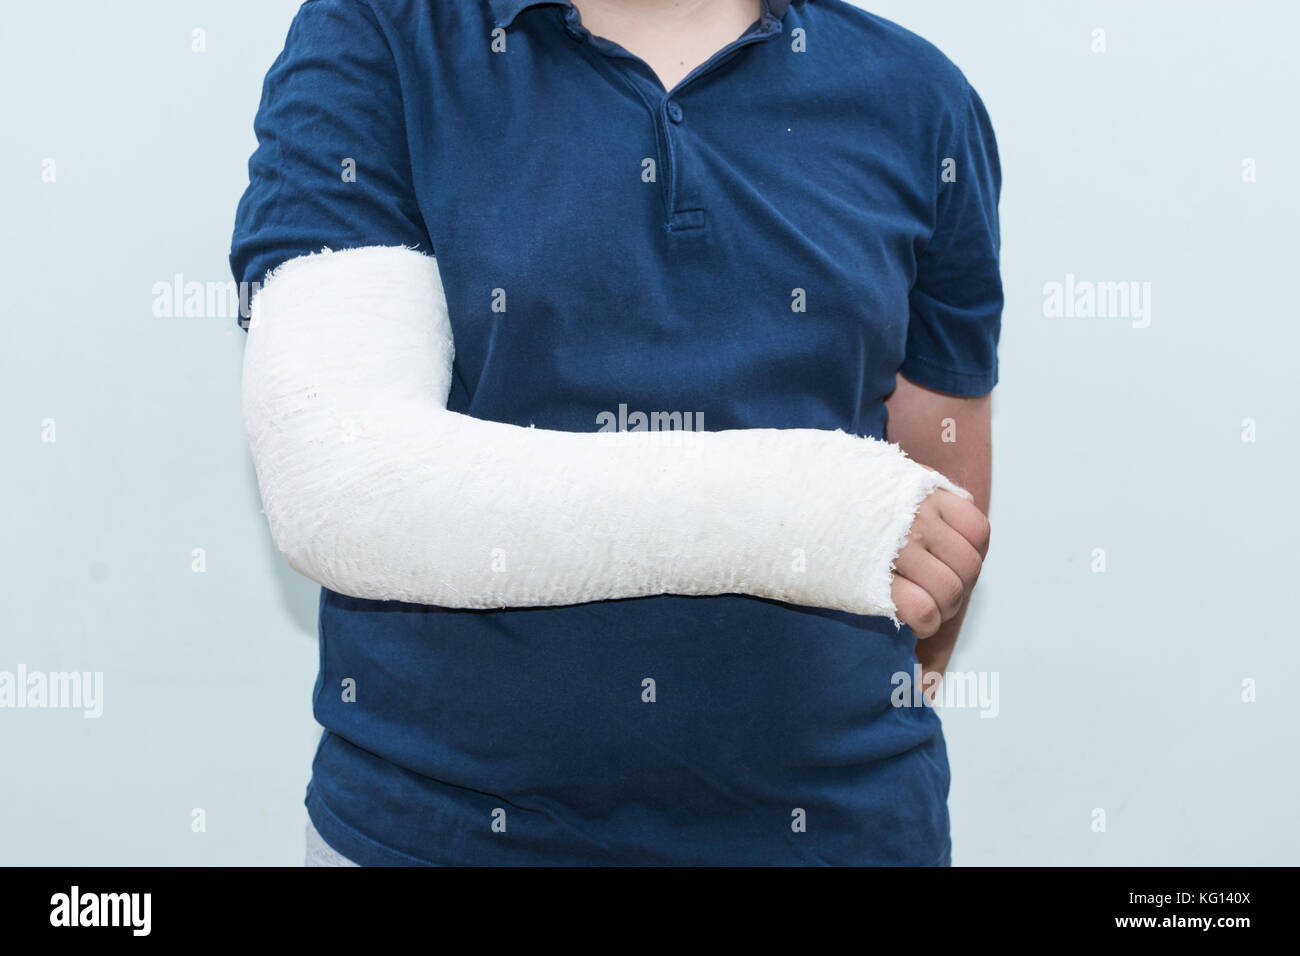 Boy with broken arm, plaster on arm as therapy. Close up of a young man's white long arm plaster / fiberglass cast covering the wrist, arm, and elbow  Stock Photo